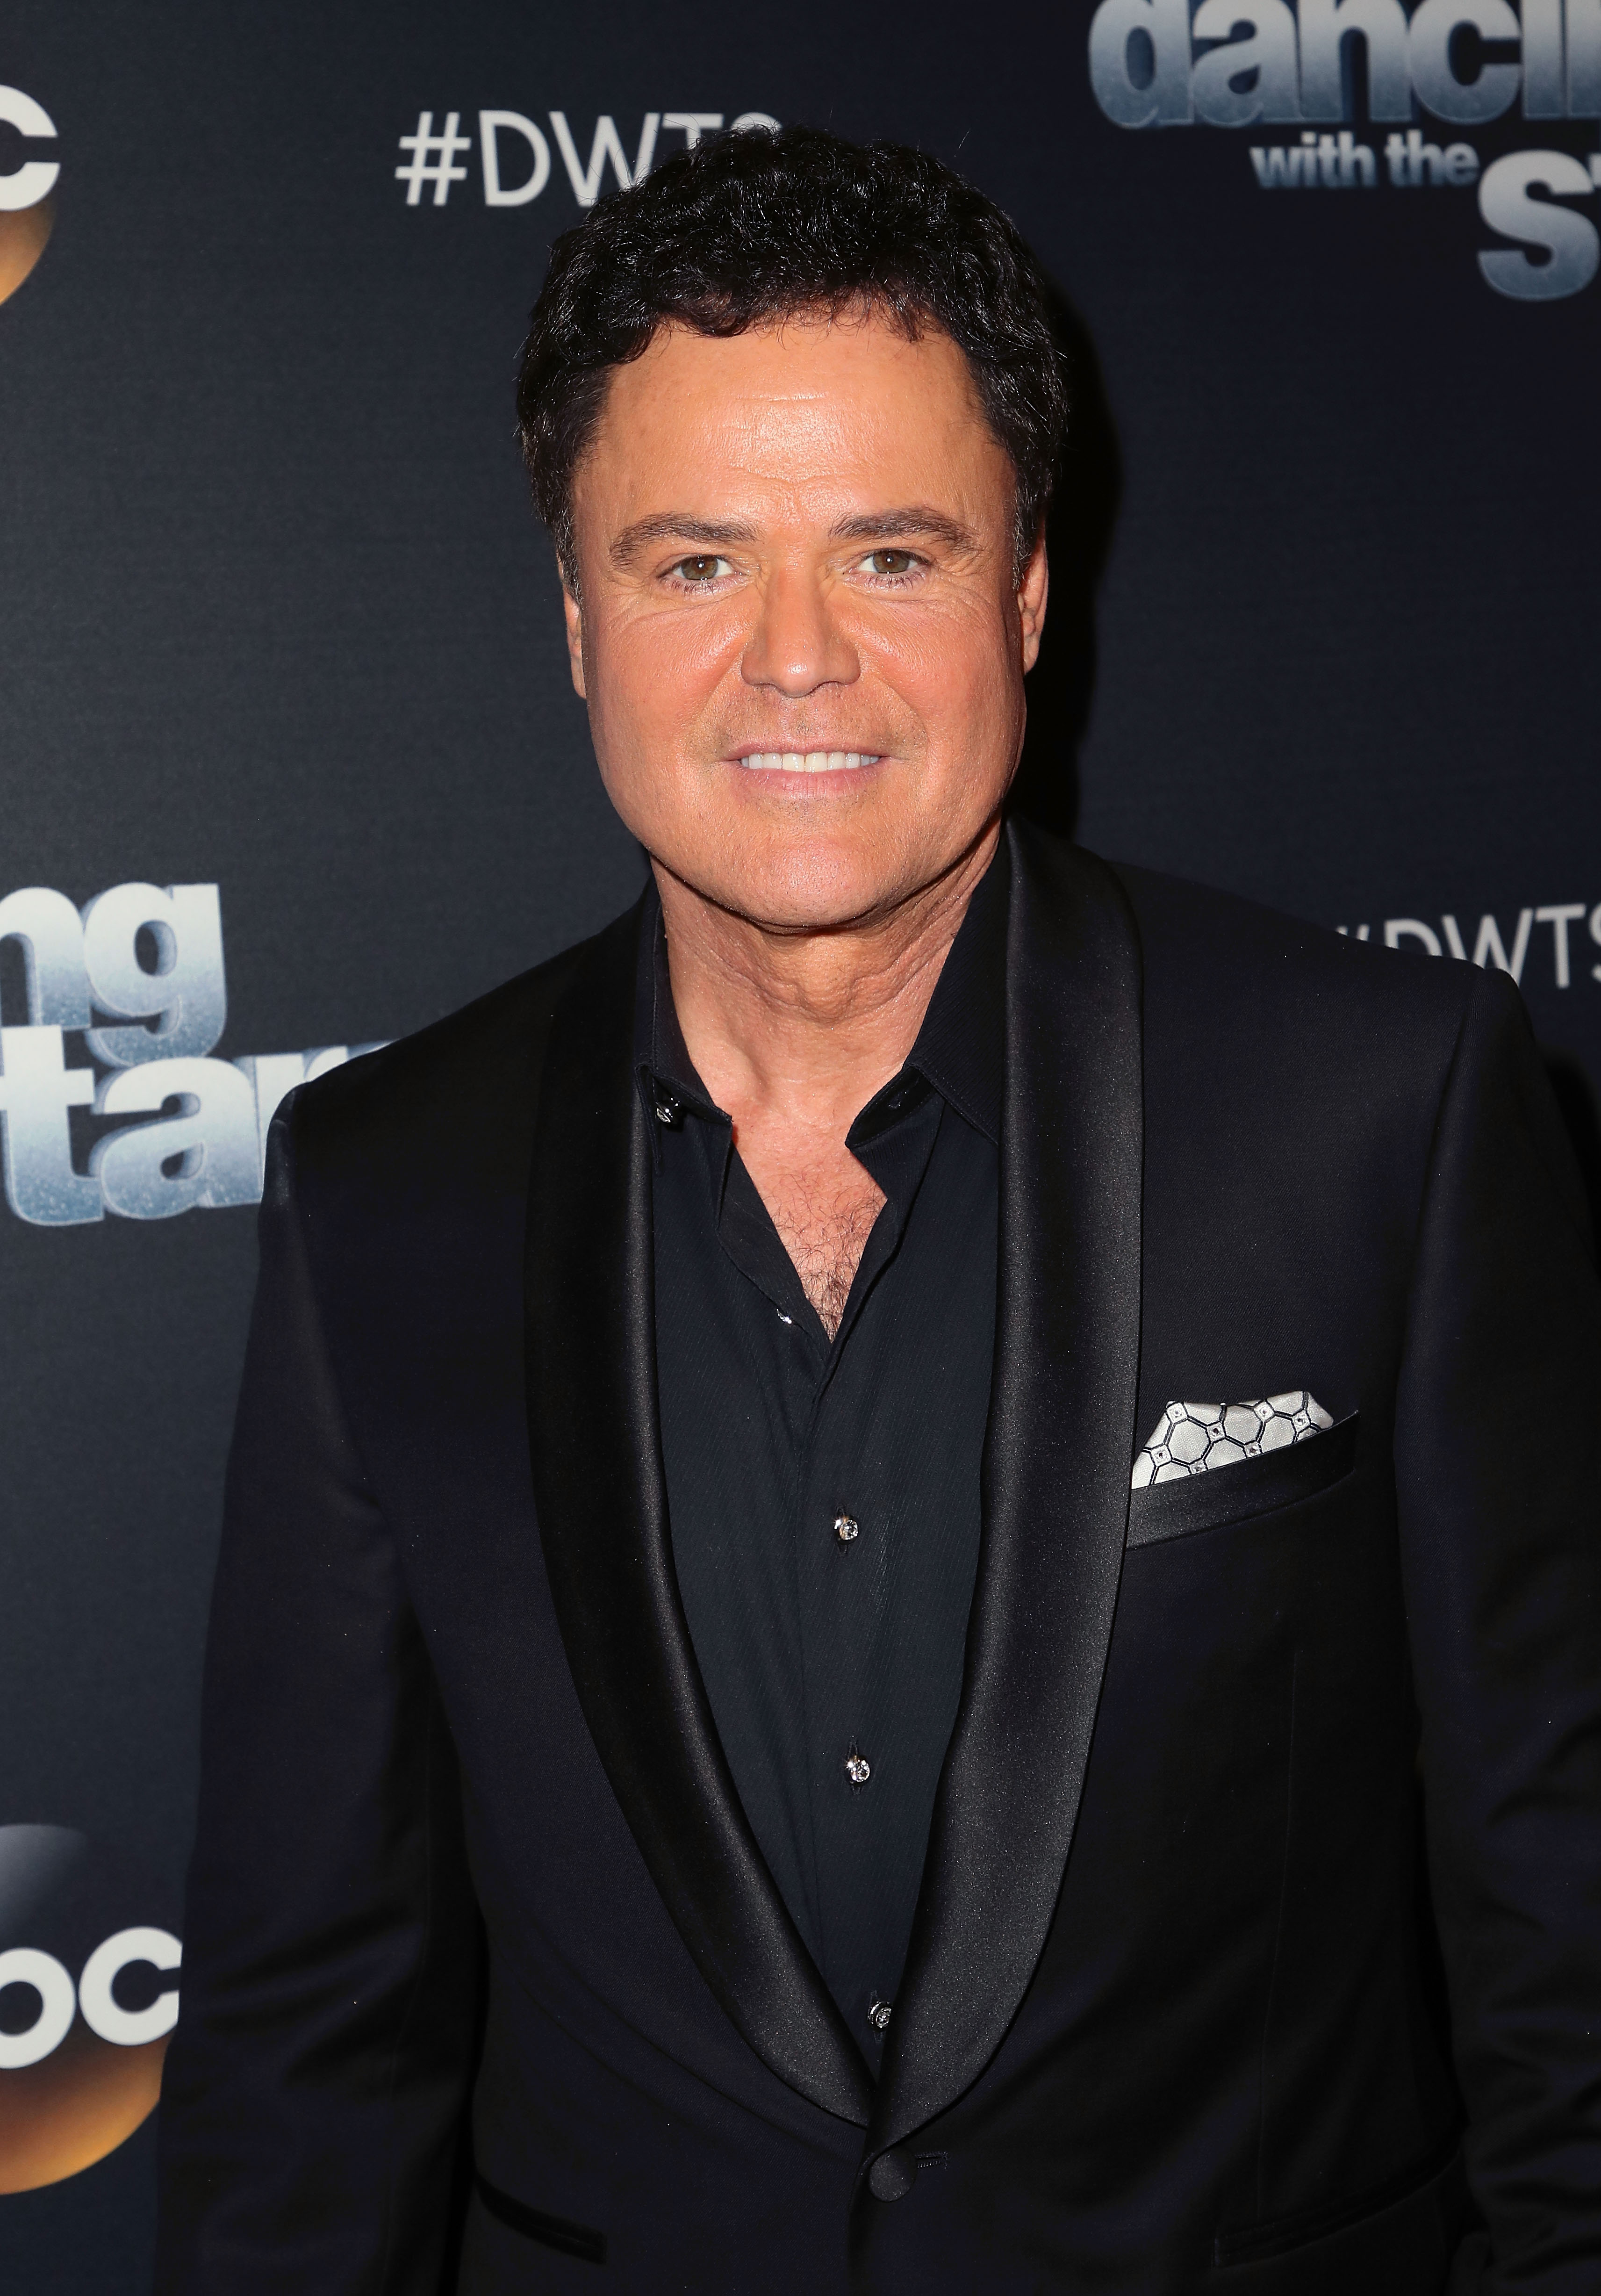 Actor and TV host Donny Osmond. | Photo: Getty Images